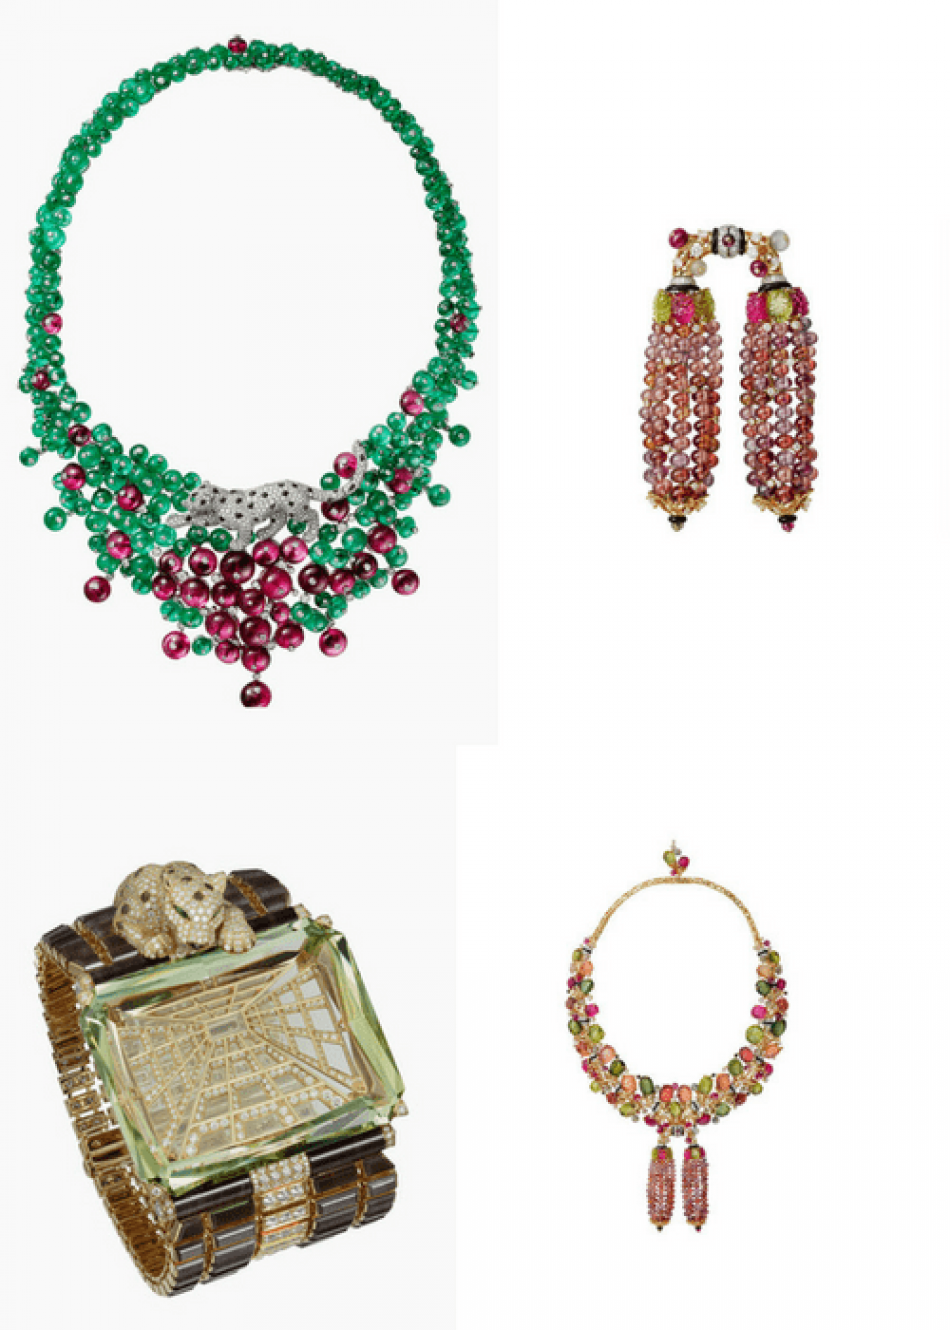 'Resonances de Cartier' Jewelry Collection. High End, versatile and extremely beautiful jewelry!